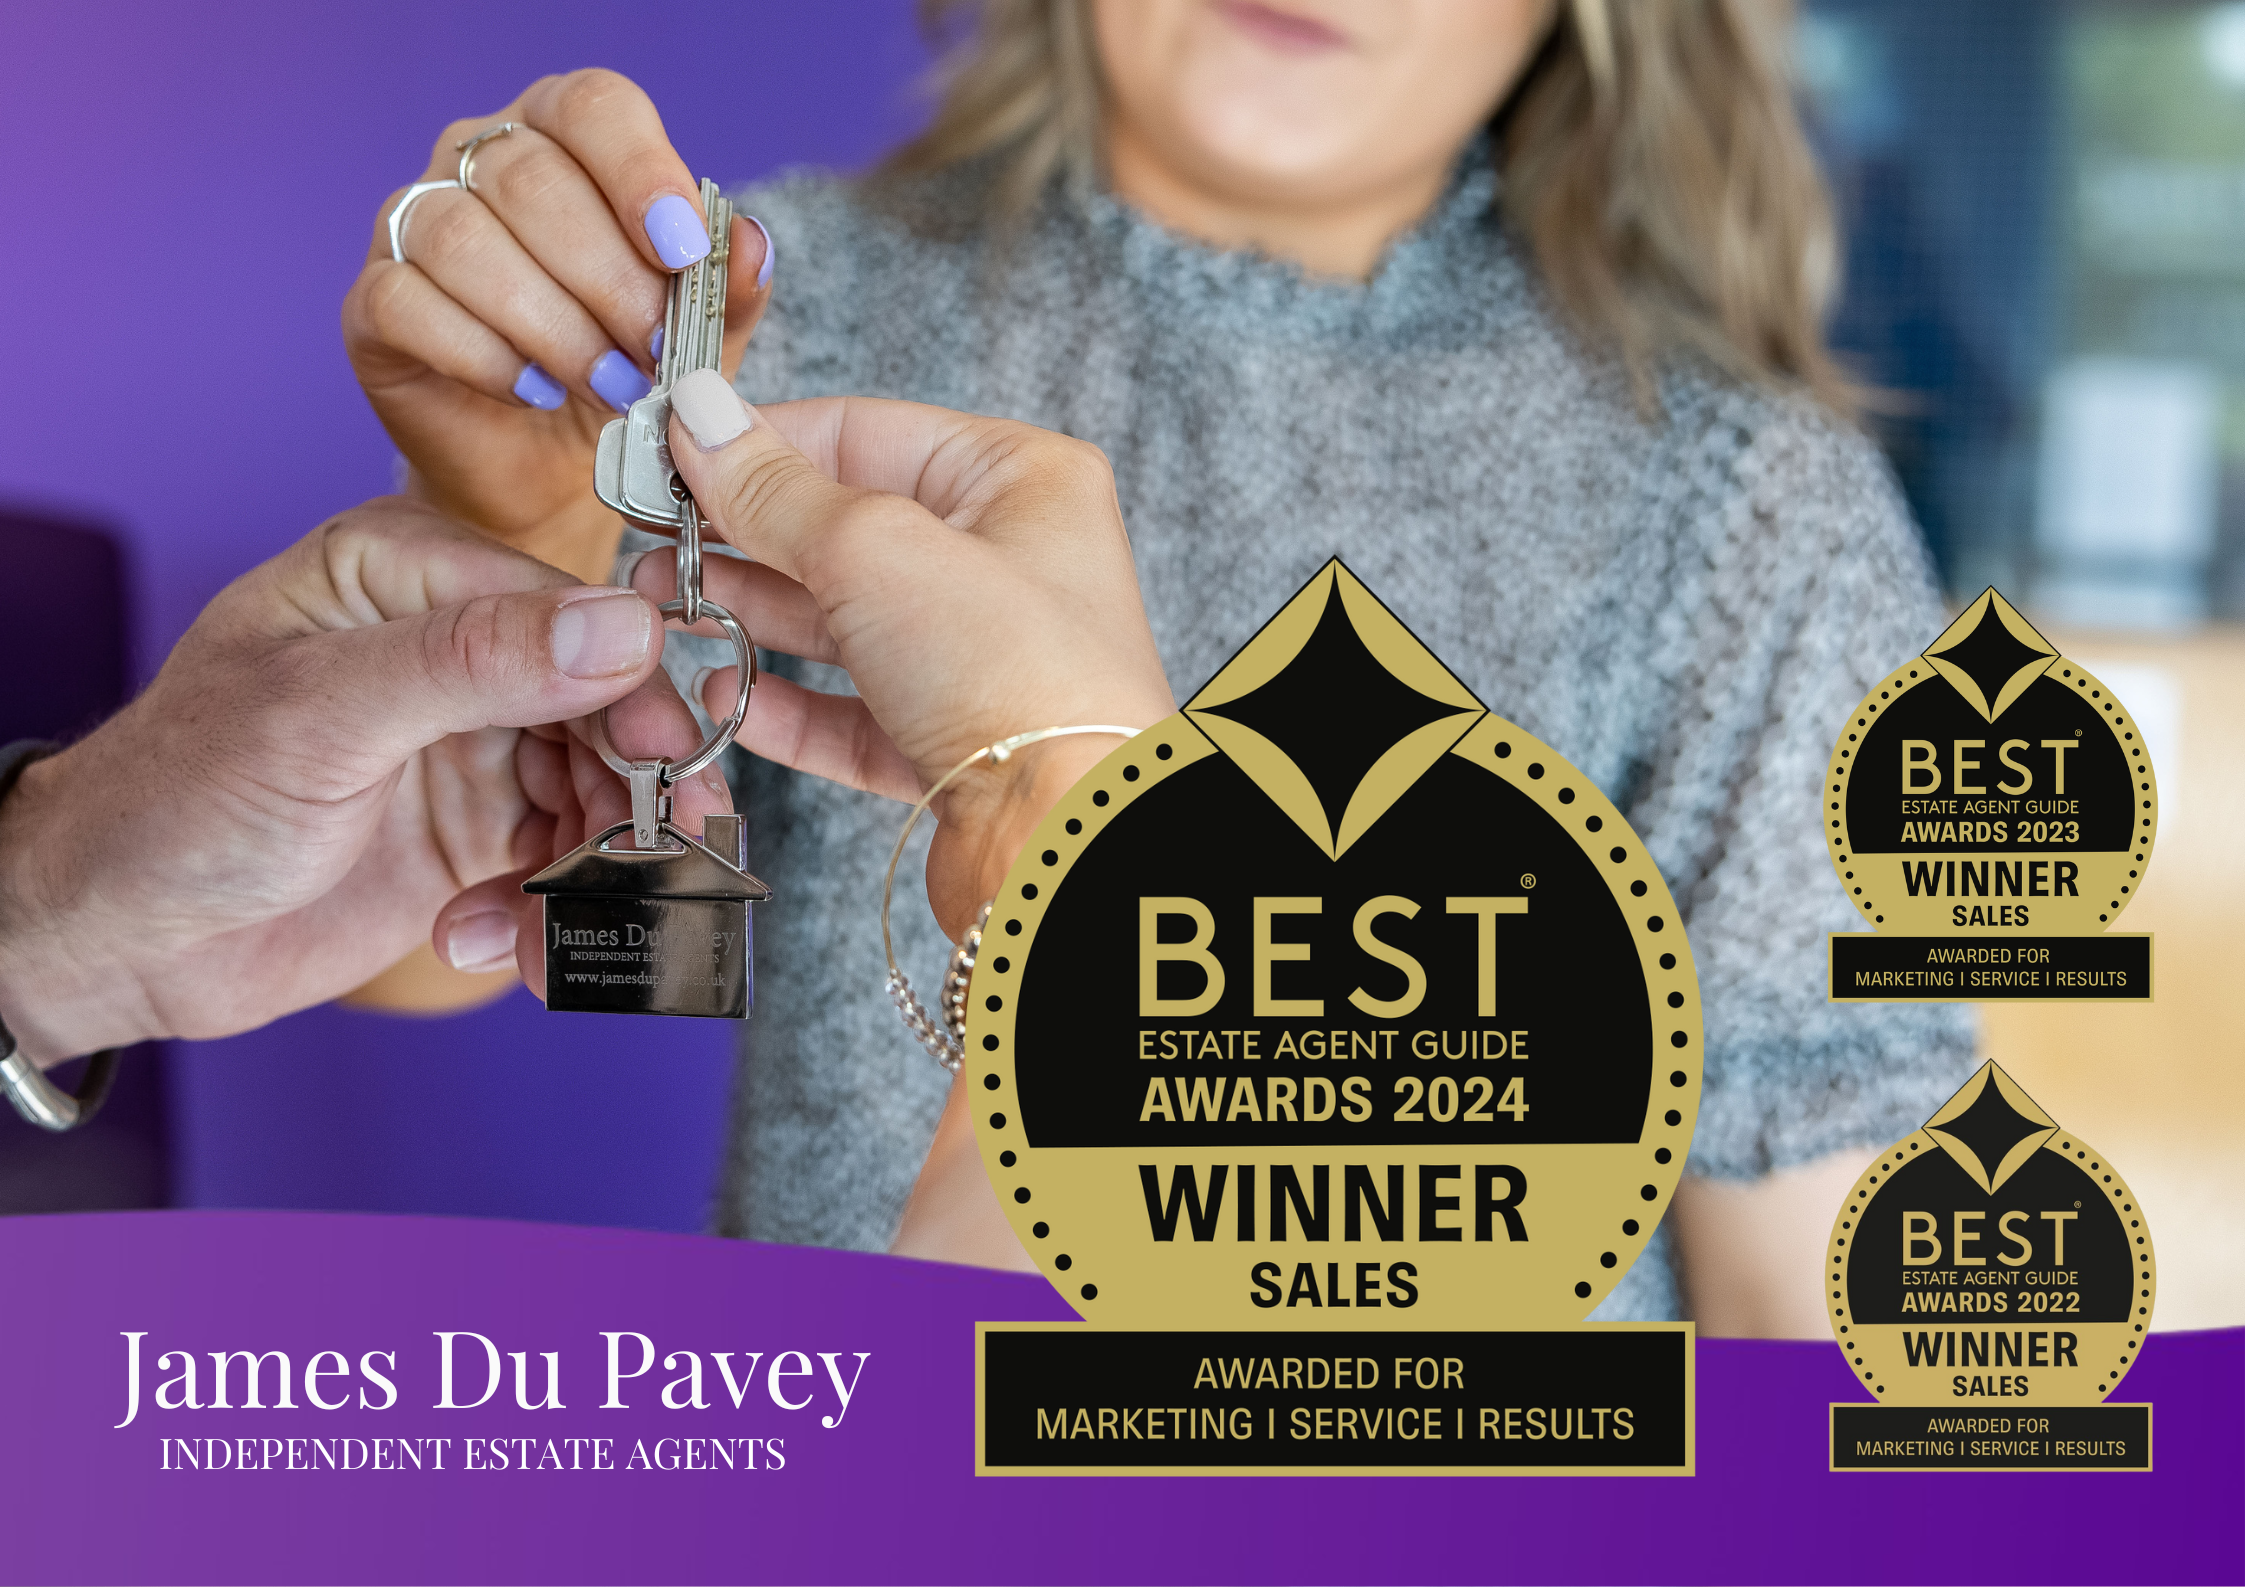 Best Estate Agent Guide Winners for the Third Consecutive Year!